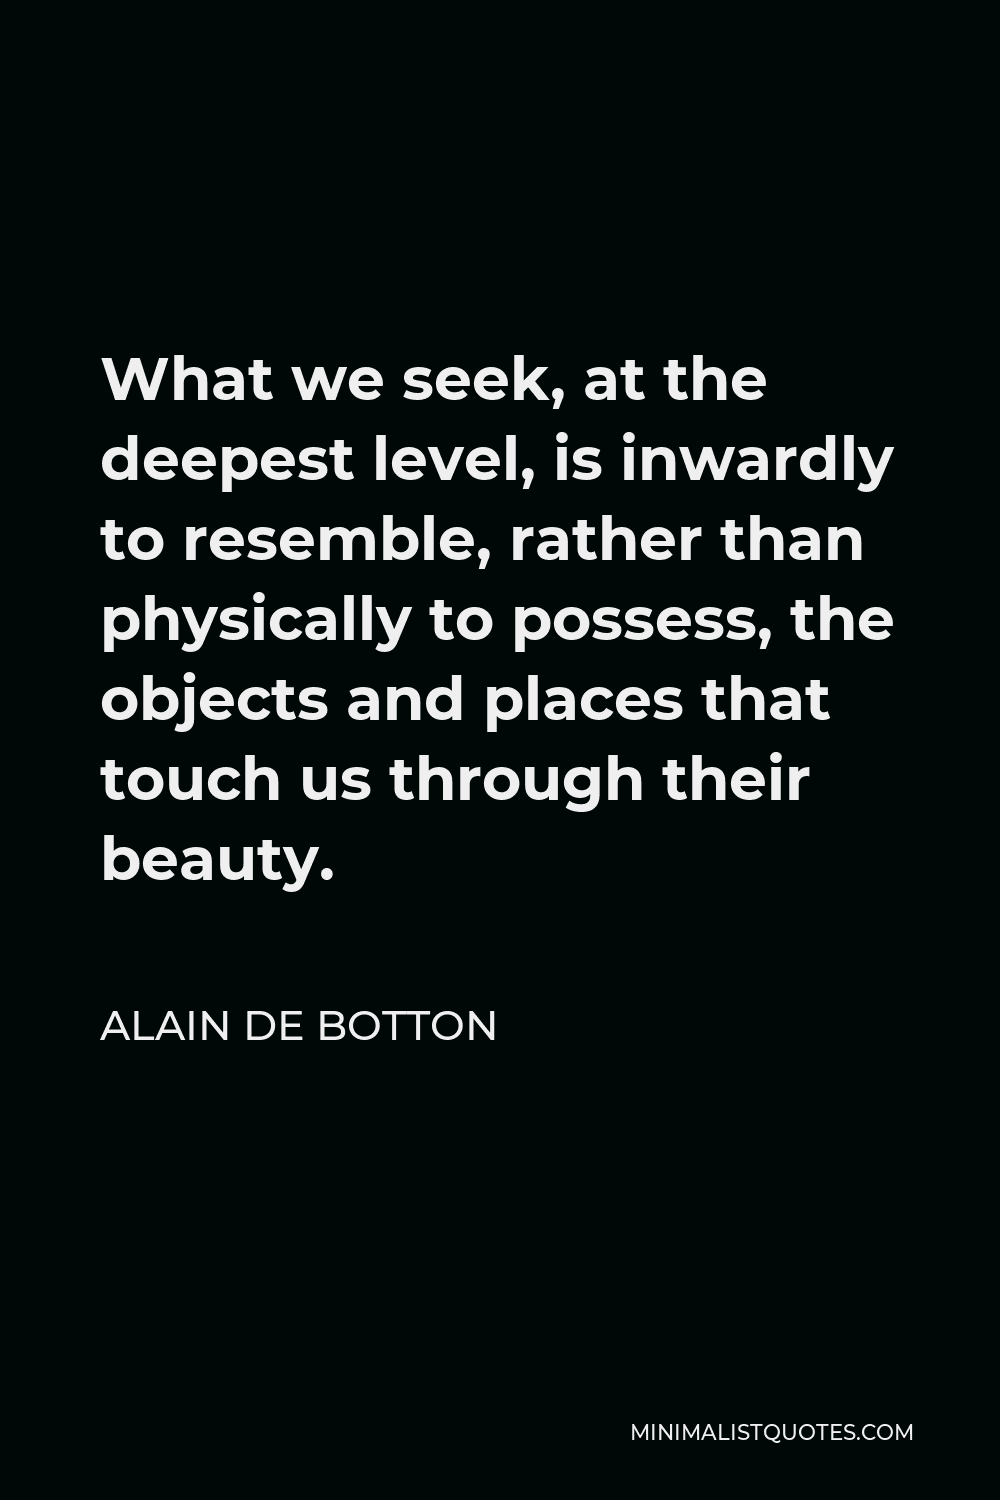 Alain de Botton Quote - What we seek, at the deepest level, is inwardly to resemble, rather than physically to possess, the objects and places that touch us through their beauty.